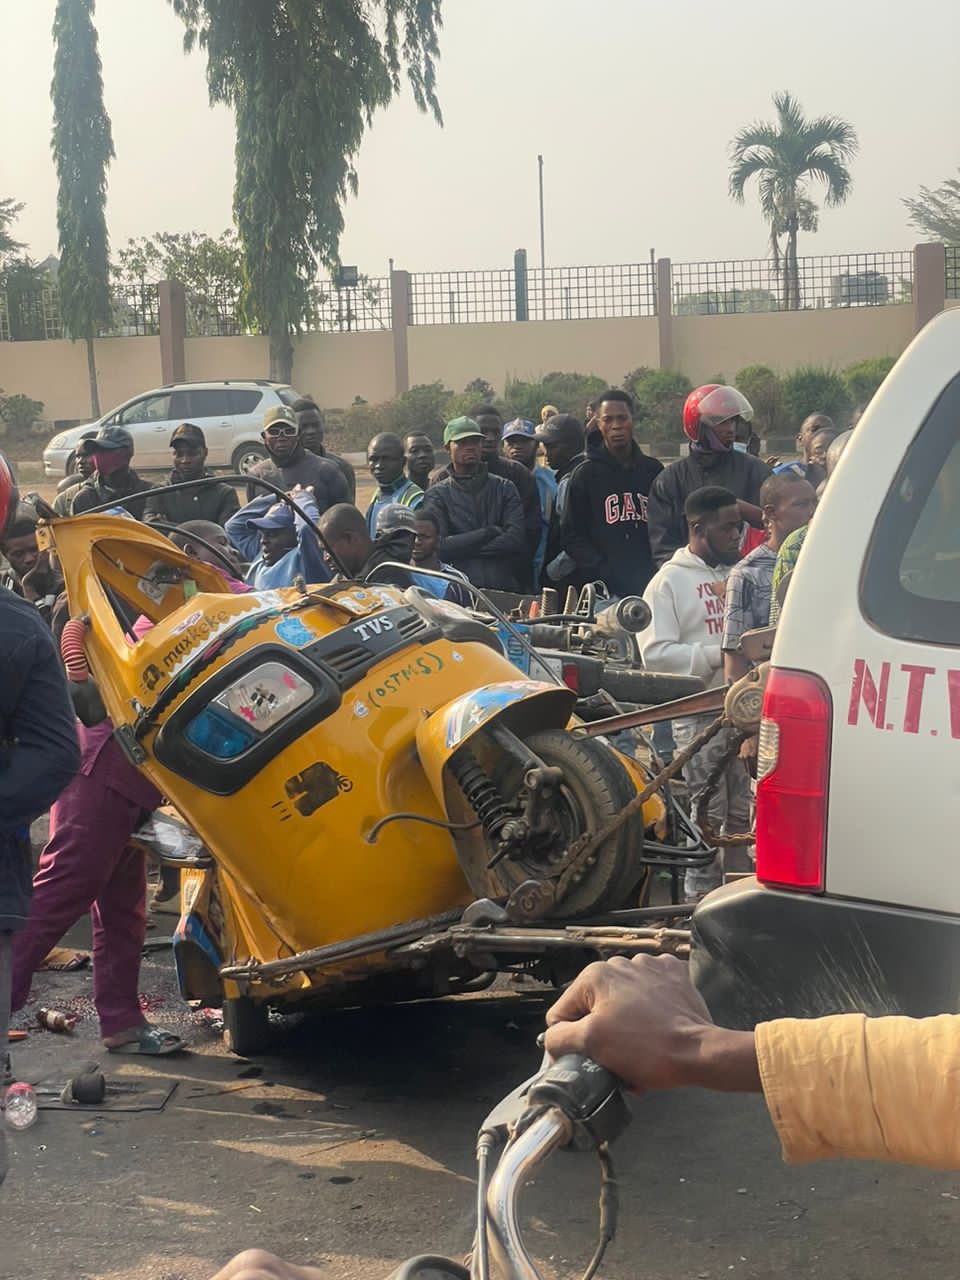 UPDATE: FRSC Confirms Seven Deaths In Osun Fatal Accident